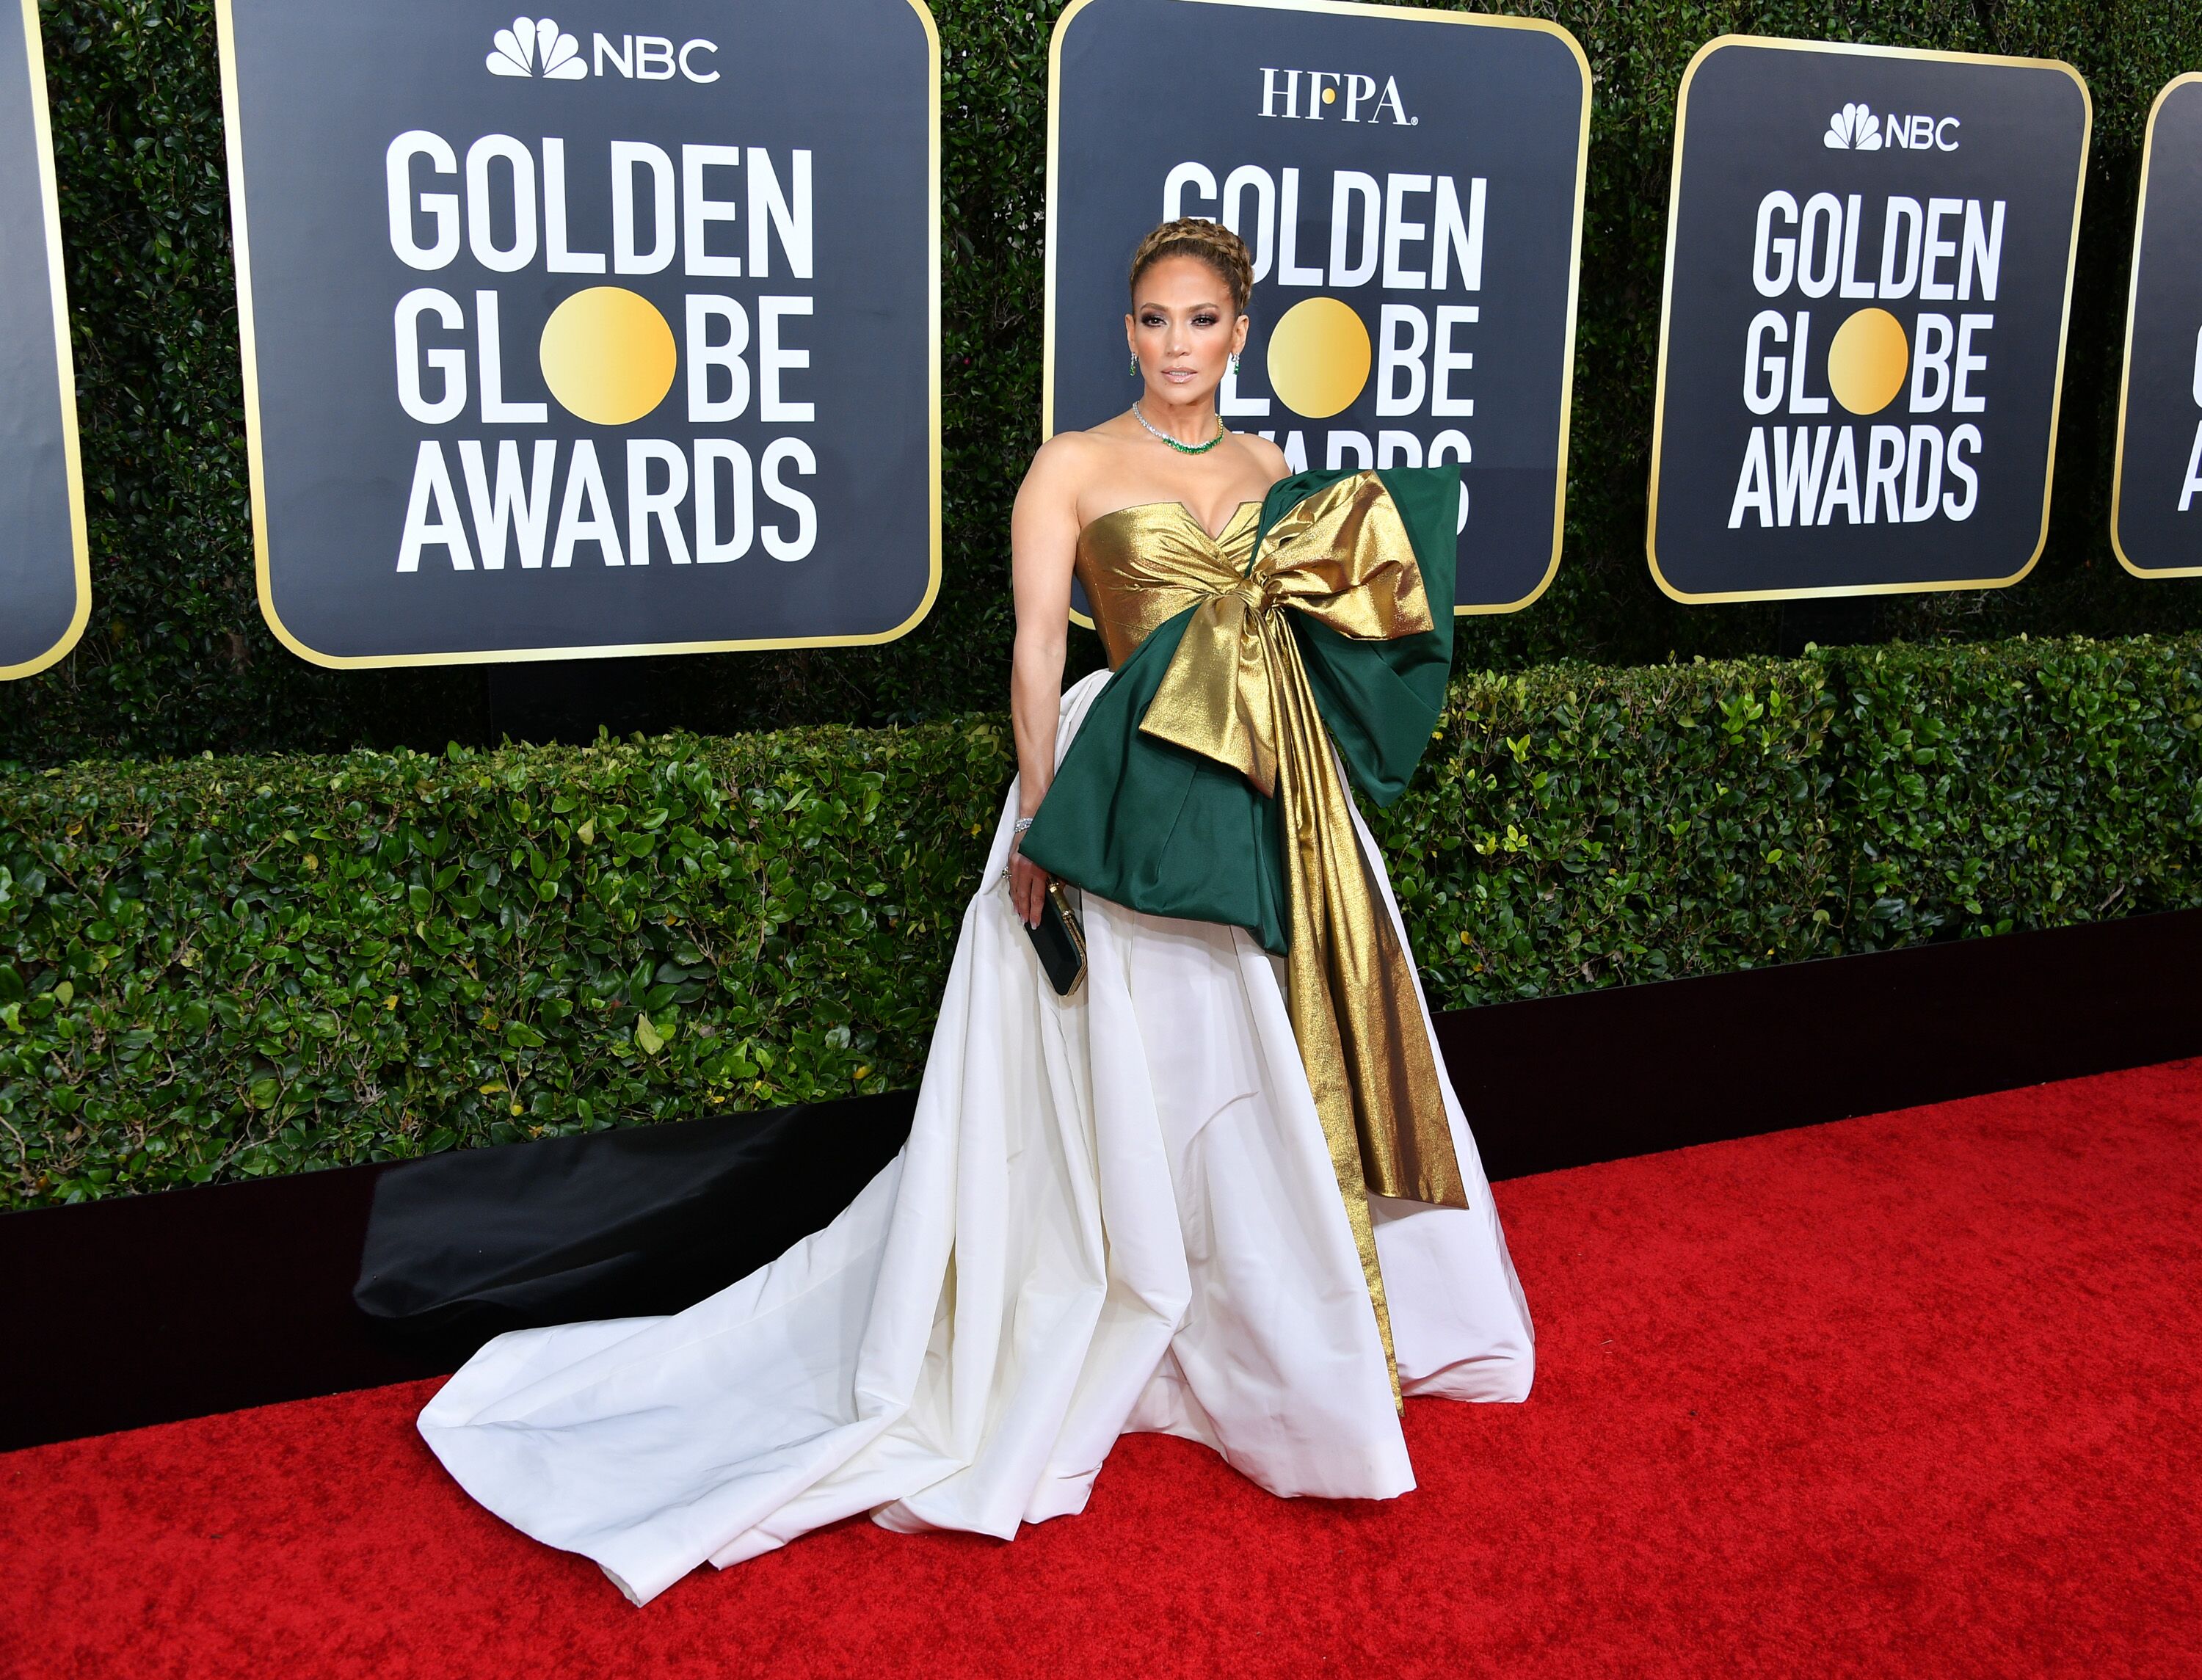 Jennifer Lopez at the 77th Annual Golden Globe Awards on January 05, 2020, in Beverly Hills, California | Photo: George Pimentel/Getty Images